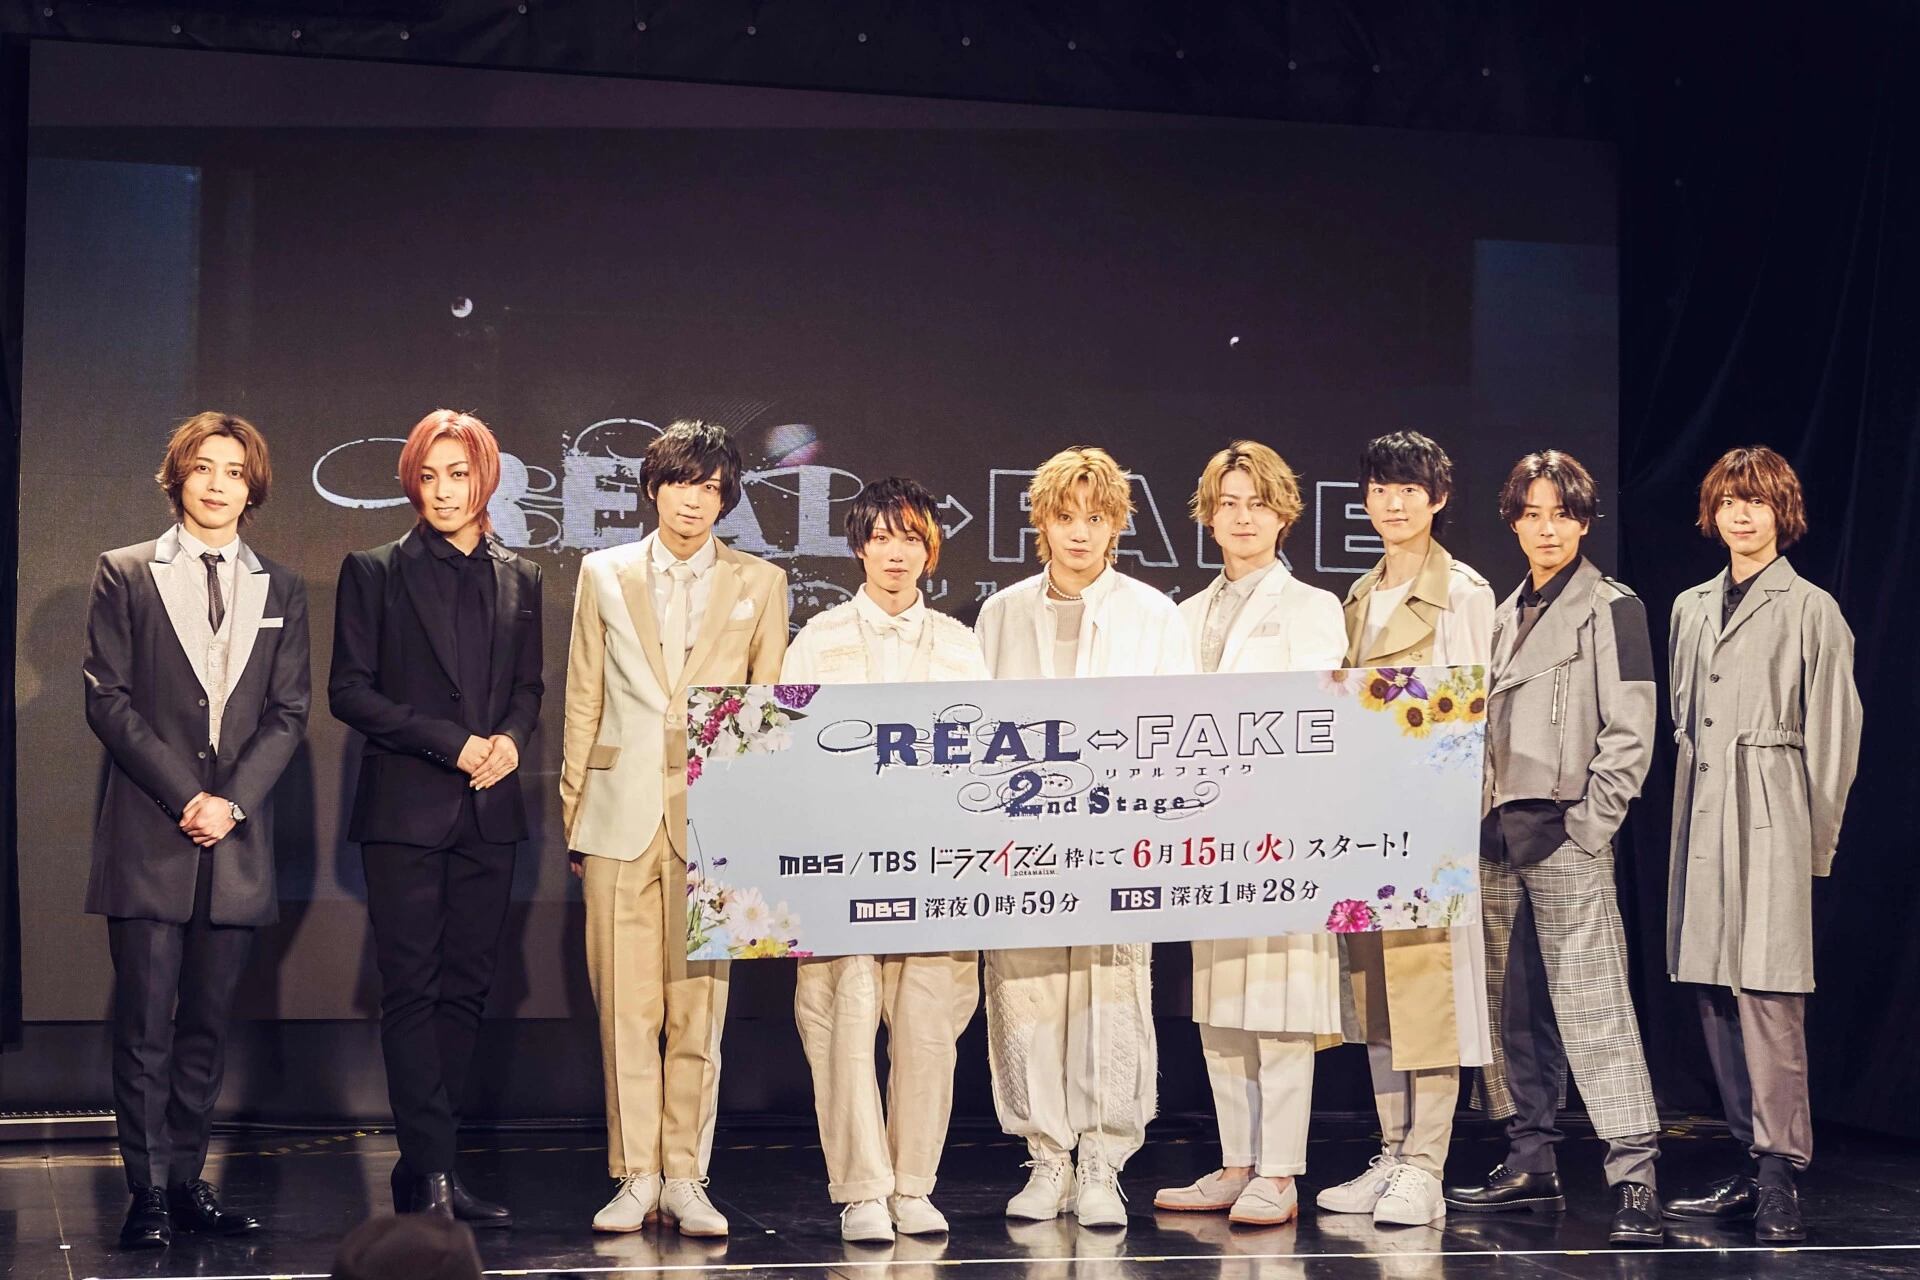 『REAL⇔FAKE 2nd Stage』完成披露トークイベント